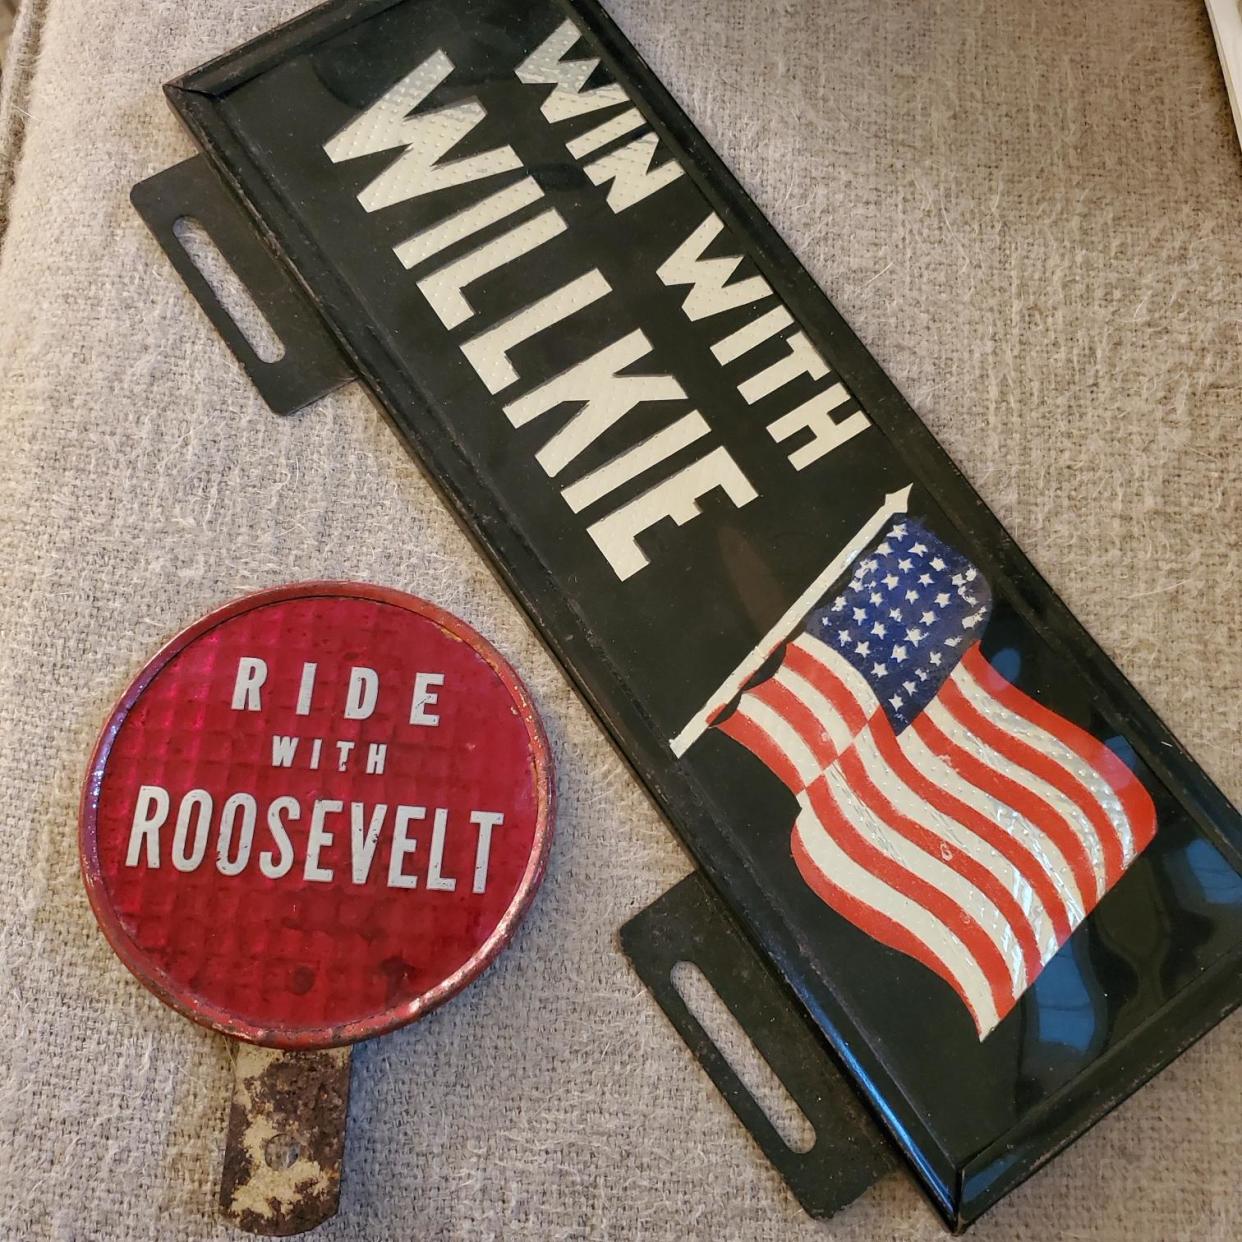 Political activist and retired attorney Susan Roman of Durham has long collected campaign memorabilia; some will be on display at the Portsmouth Athenaeum's Randall Gallery starting Feb. 16. Republican Wendell Willkie ran unsuccessfully against President Franklin D. Roosevelt in 1940.